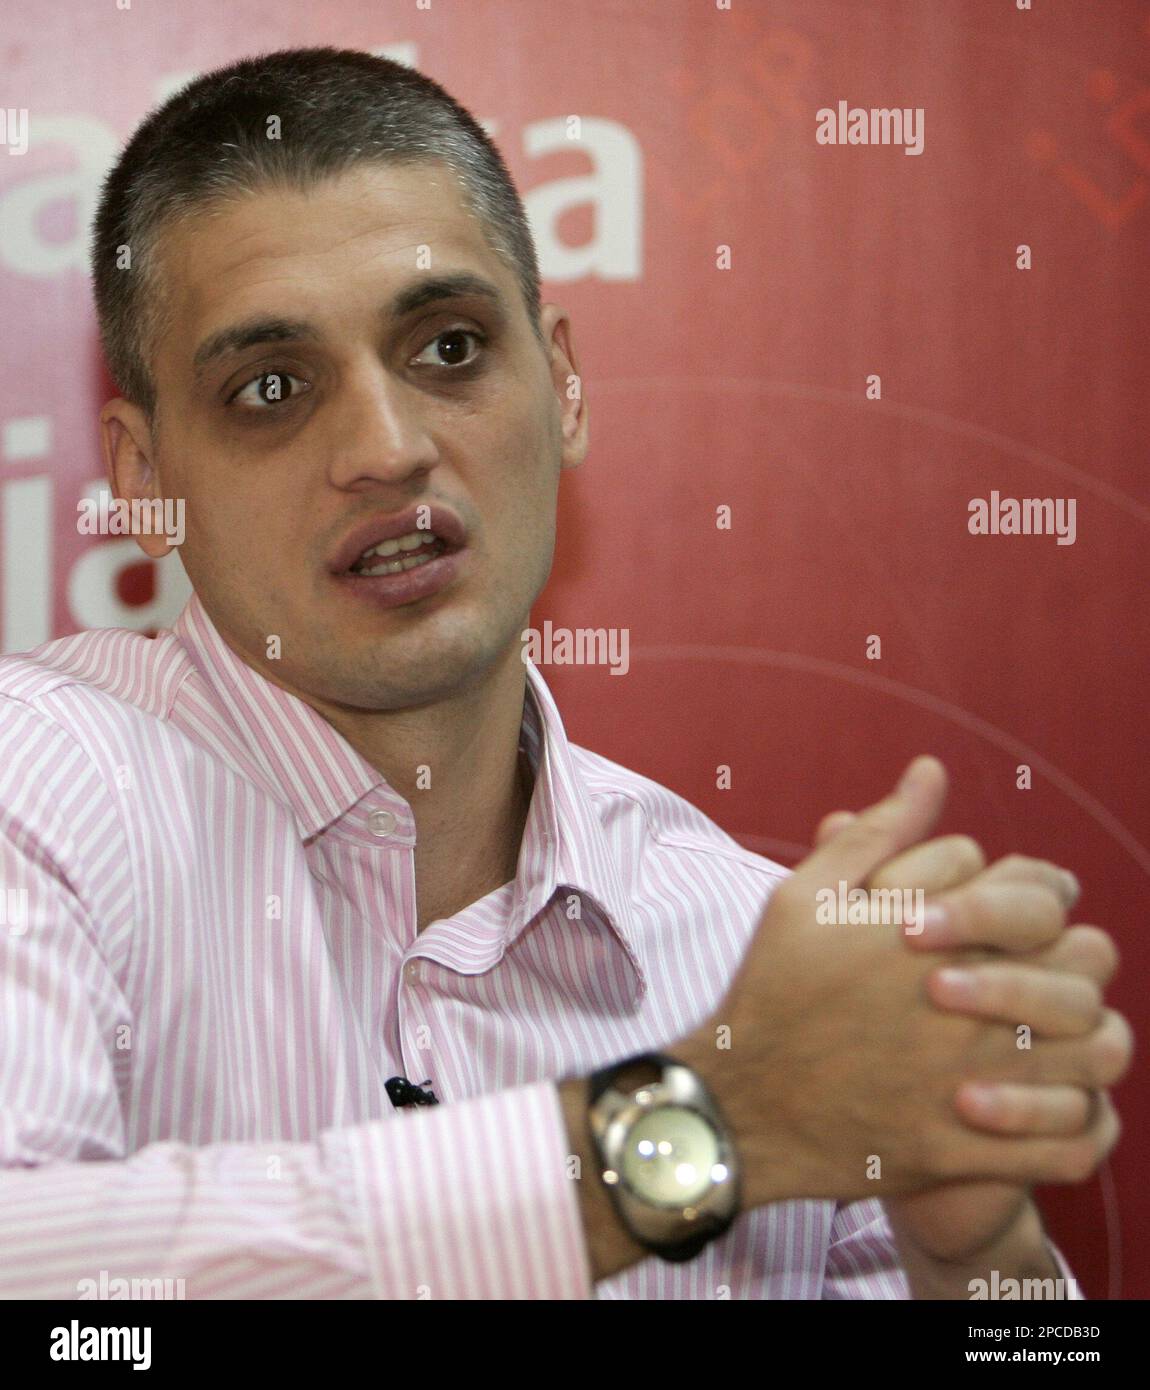 Cedomir Jovanovic, the leader of the Liberal Democratic Party gestures during an interview with The Associated Press, in Belgrade, Wednesday, Oct. 25, 2006. Jovanovic says "We have to accept the reality, Jovanovic says, "and the reality is that Kosovo has been independent from Belgrade since 1999" when a NATO air war forced Serbia to relinquish control over the region to a U.N. administration. (AP Photo/Darko Vojinovic) Stock Photo